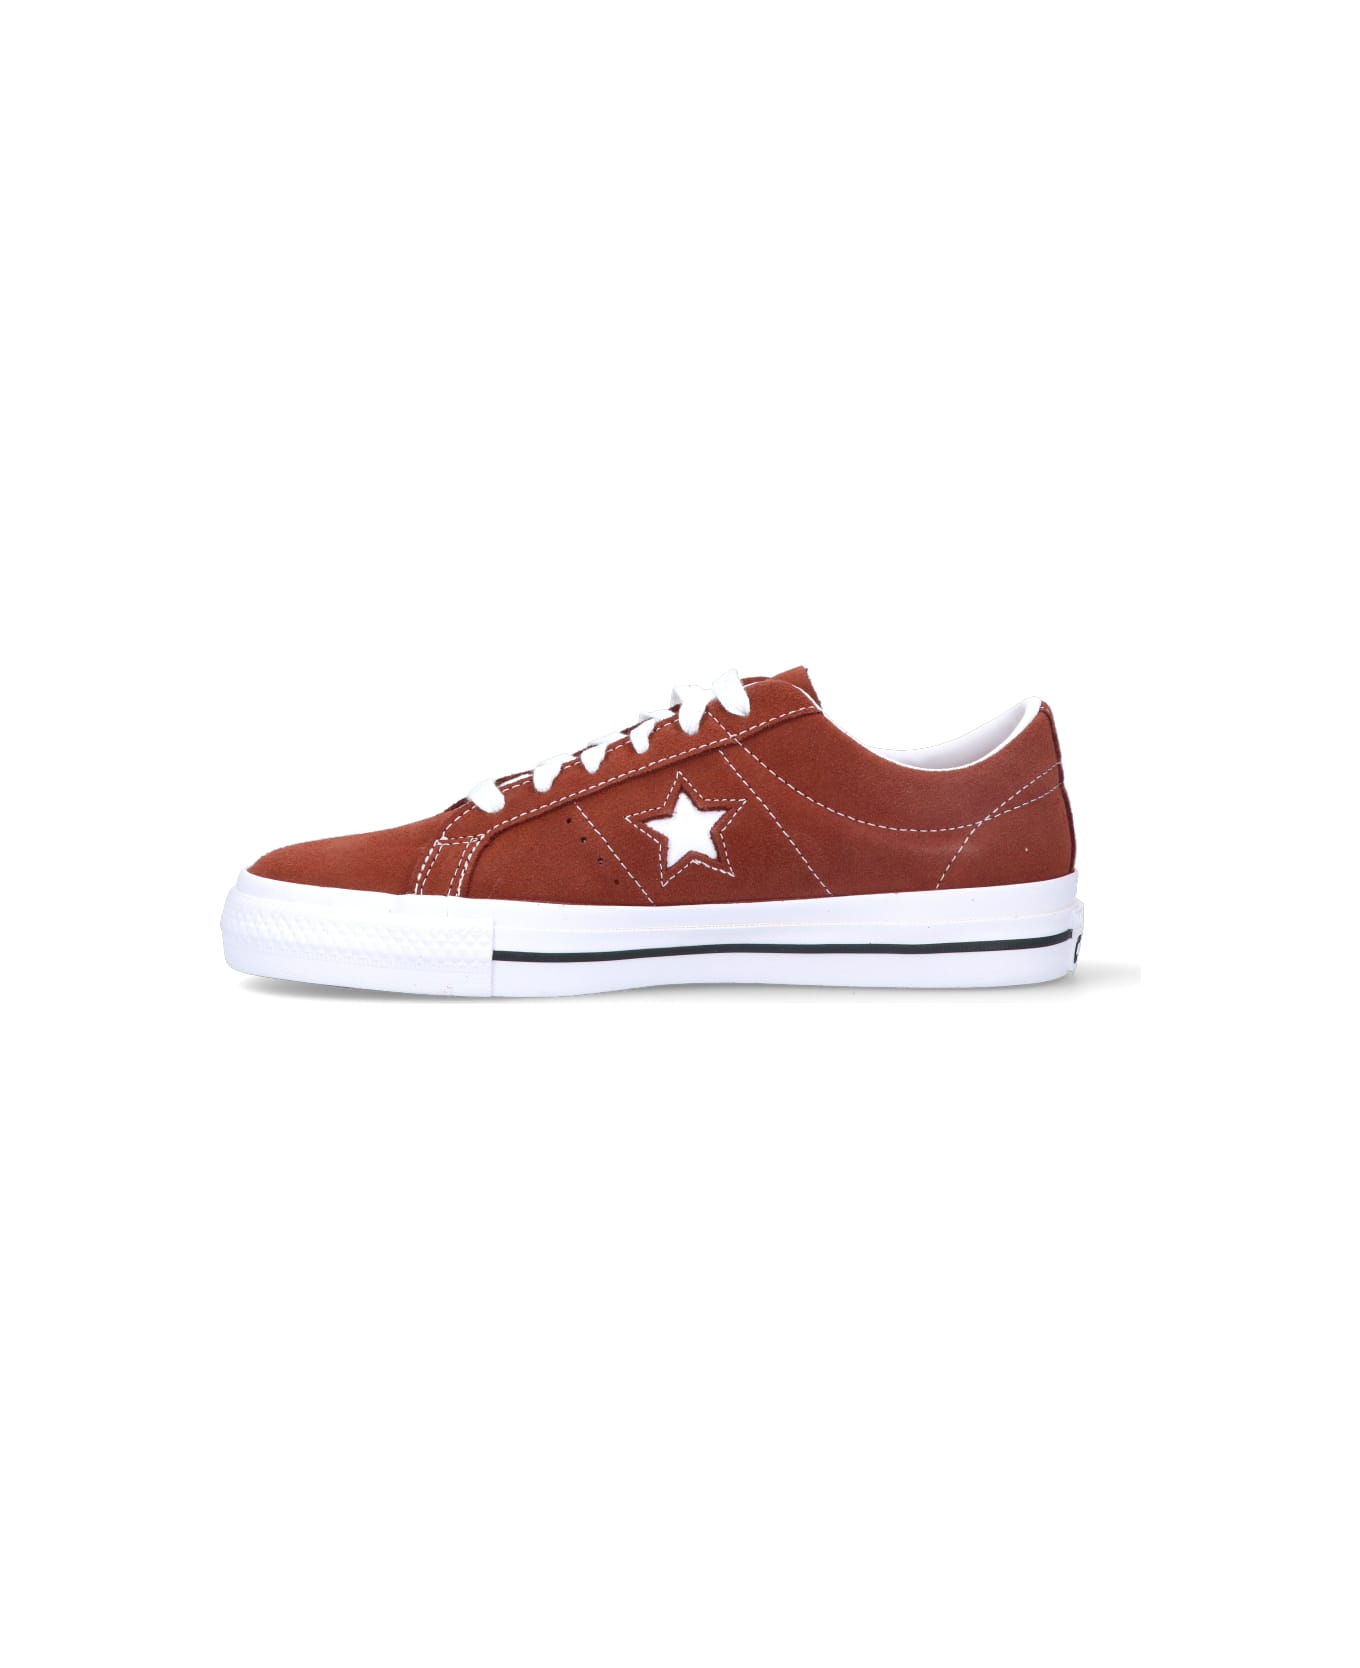 Converse 'one Star Pro' Sneakers - Brown